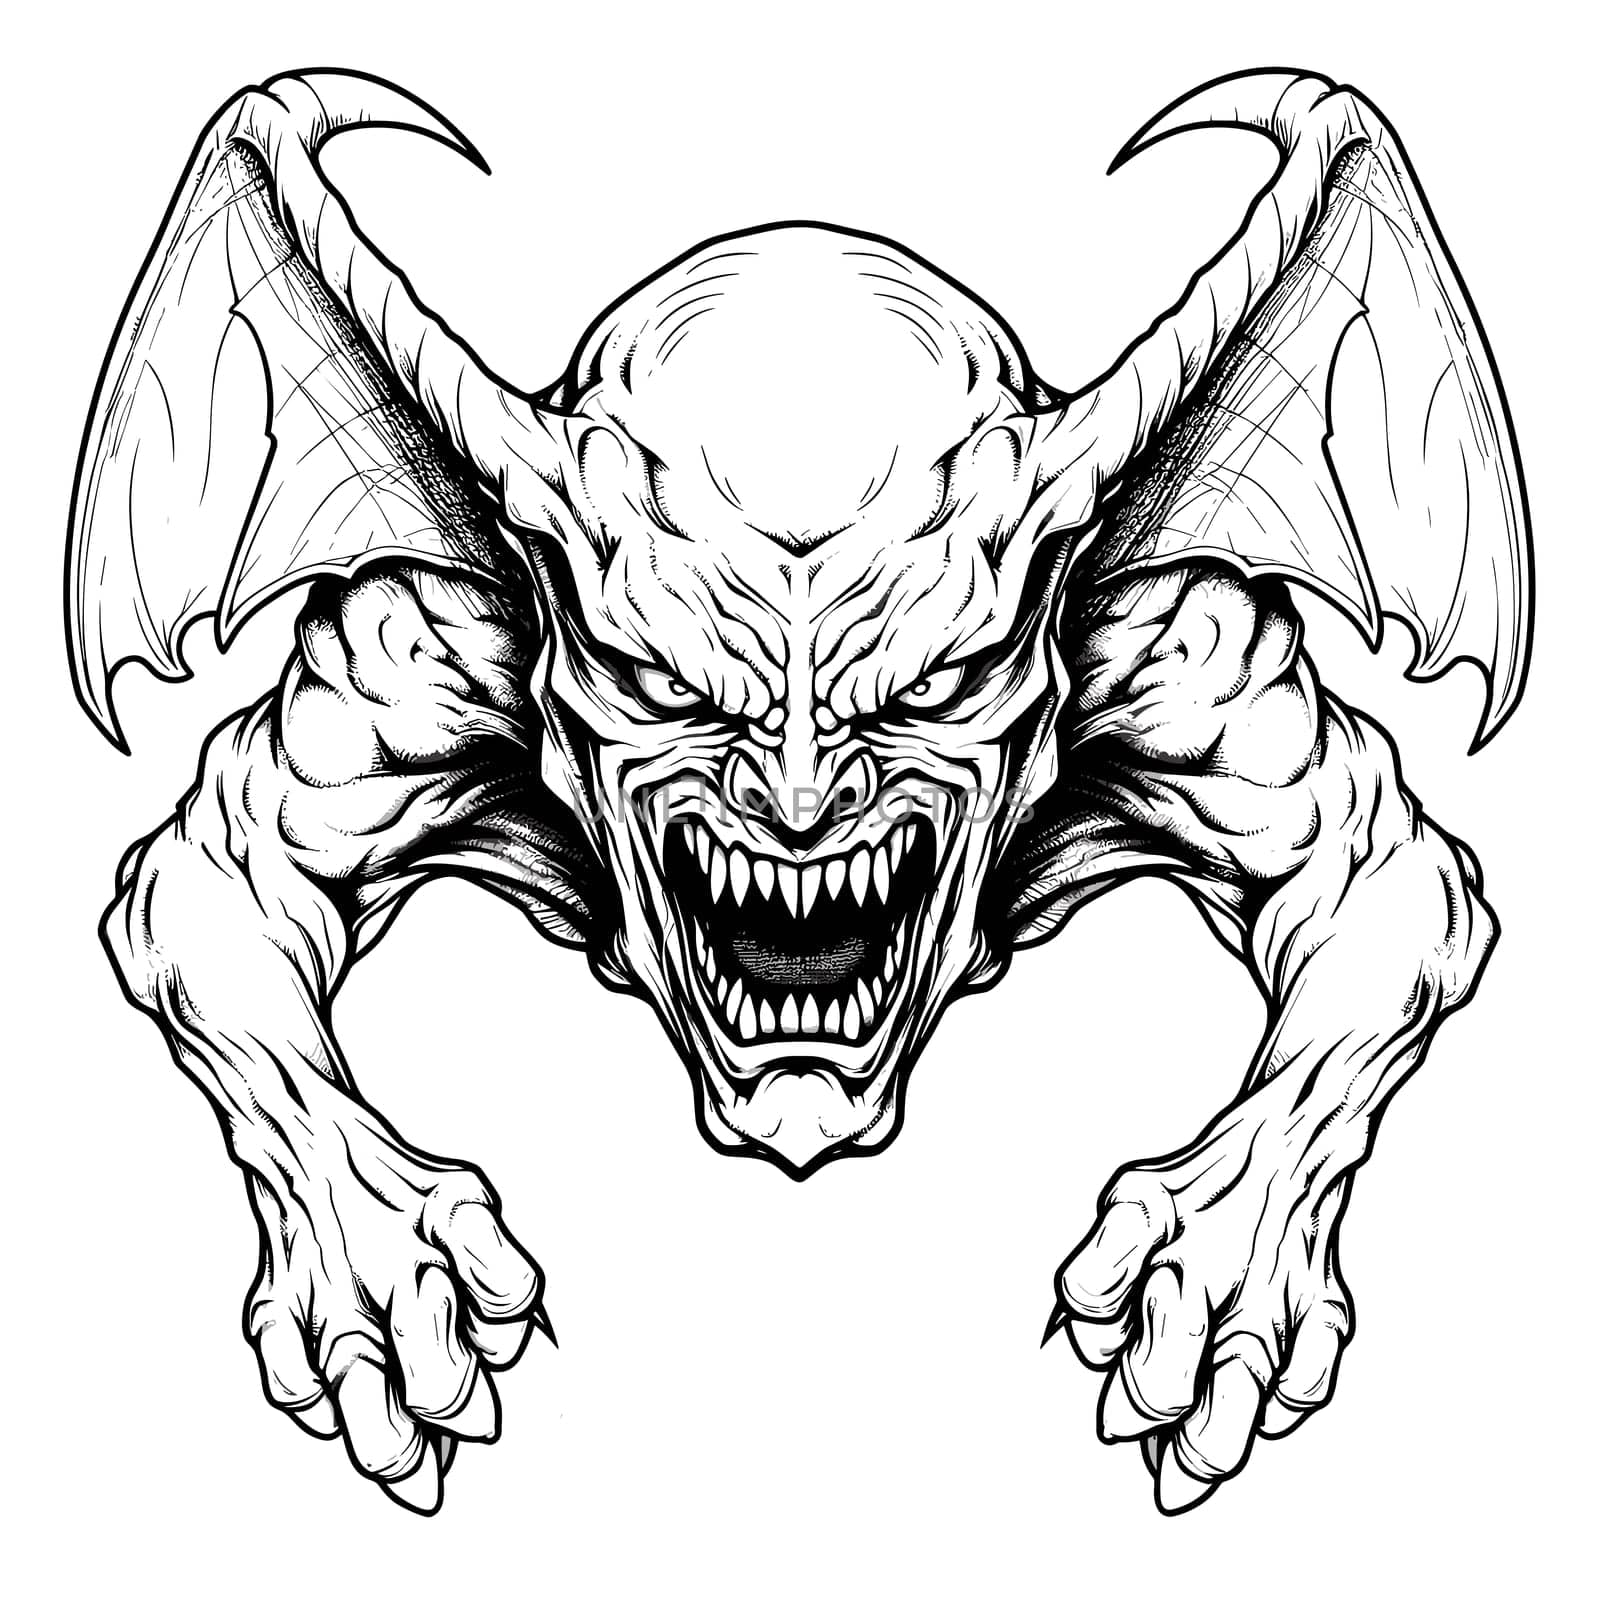 Terrible mythical monster of nightmares in vector art style. The sleep of the mind gives birth to monsters. Graphic design element and template for t-shirt print, sticker, tattoo, poster, etc.